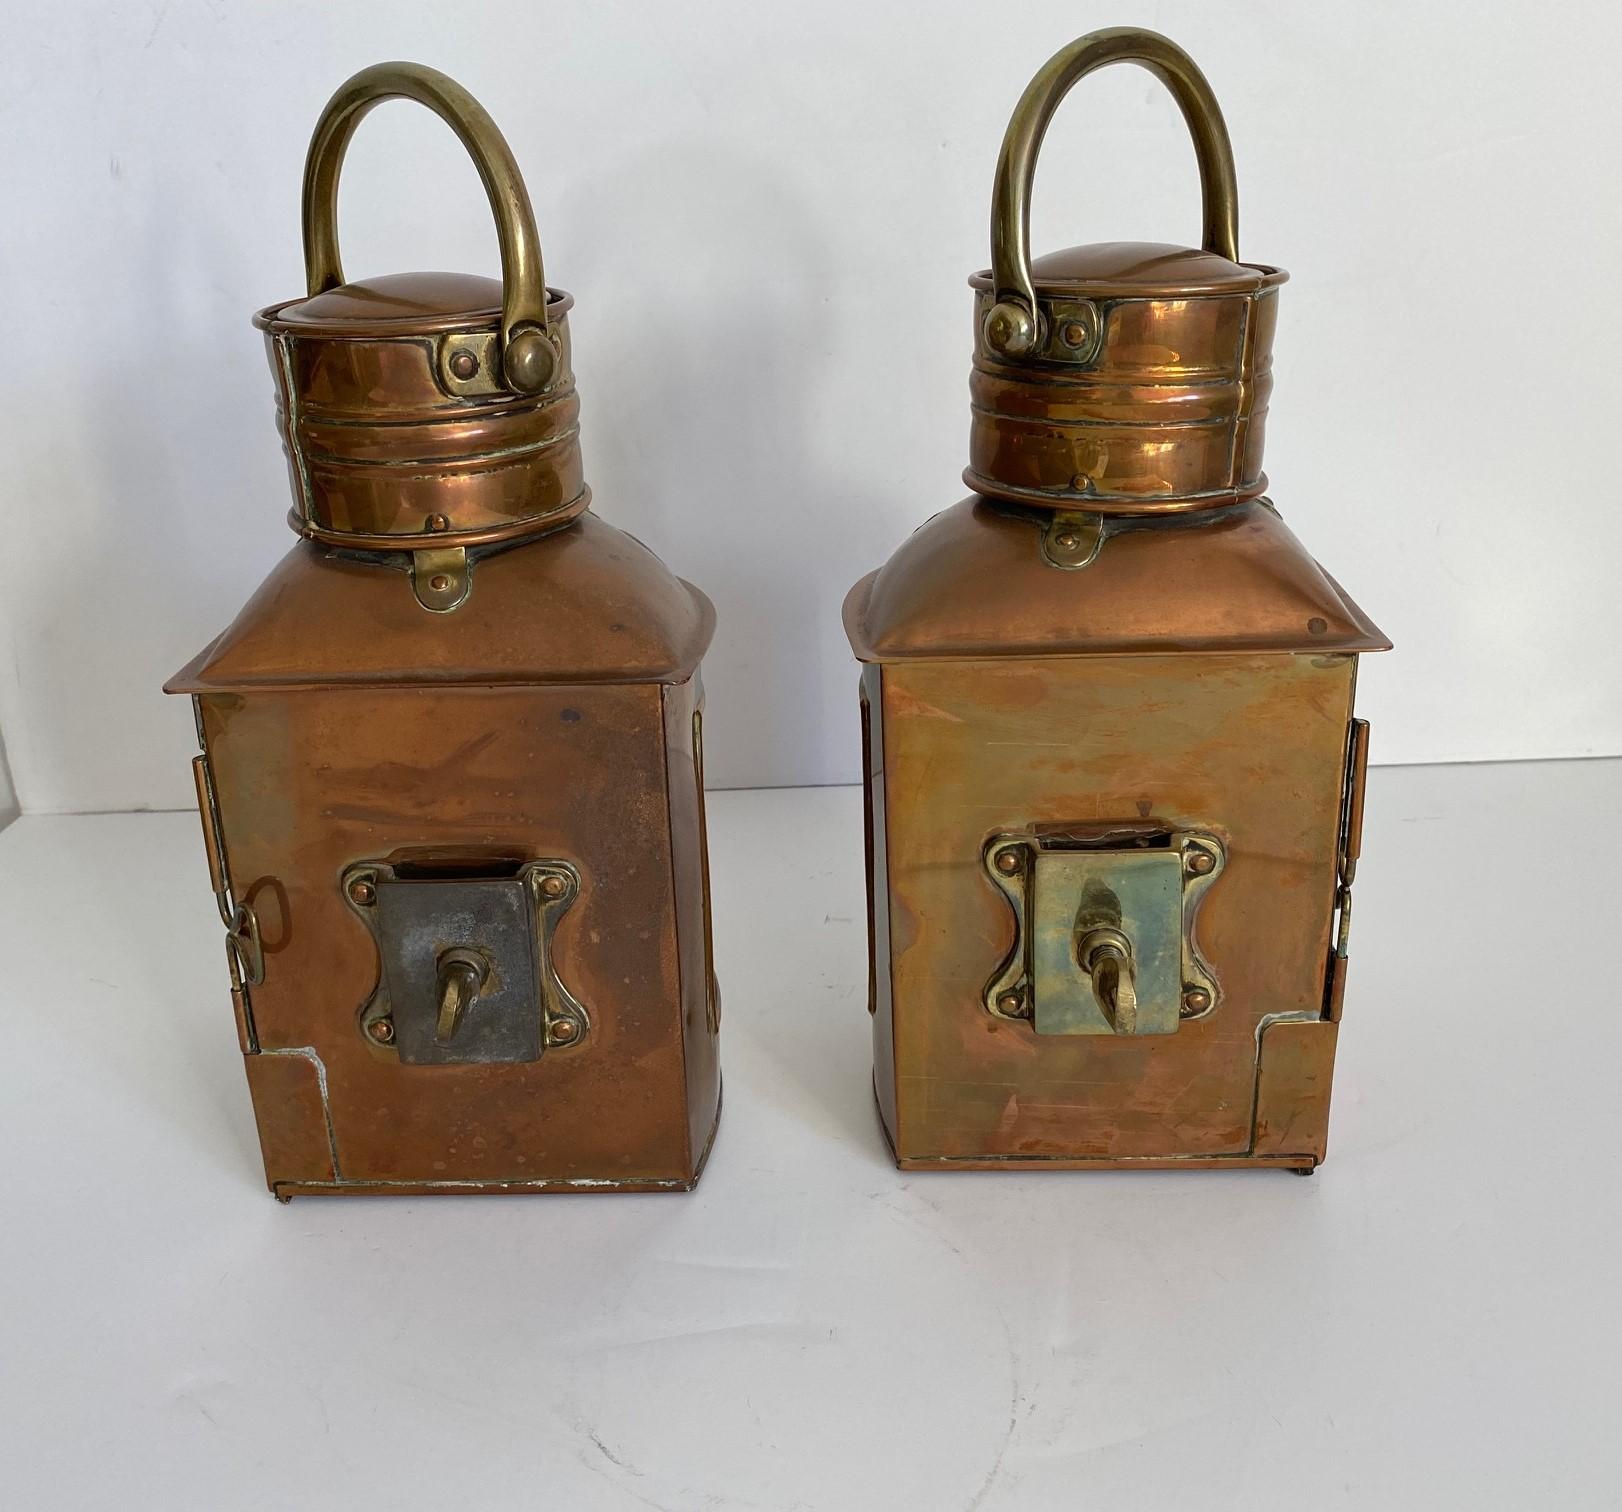 A pair of 19th-century copper ship lanterns. Original blue and red glass marked Port Starboard with brass accents.